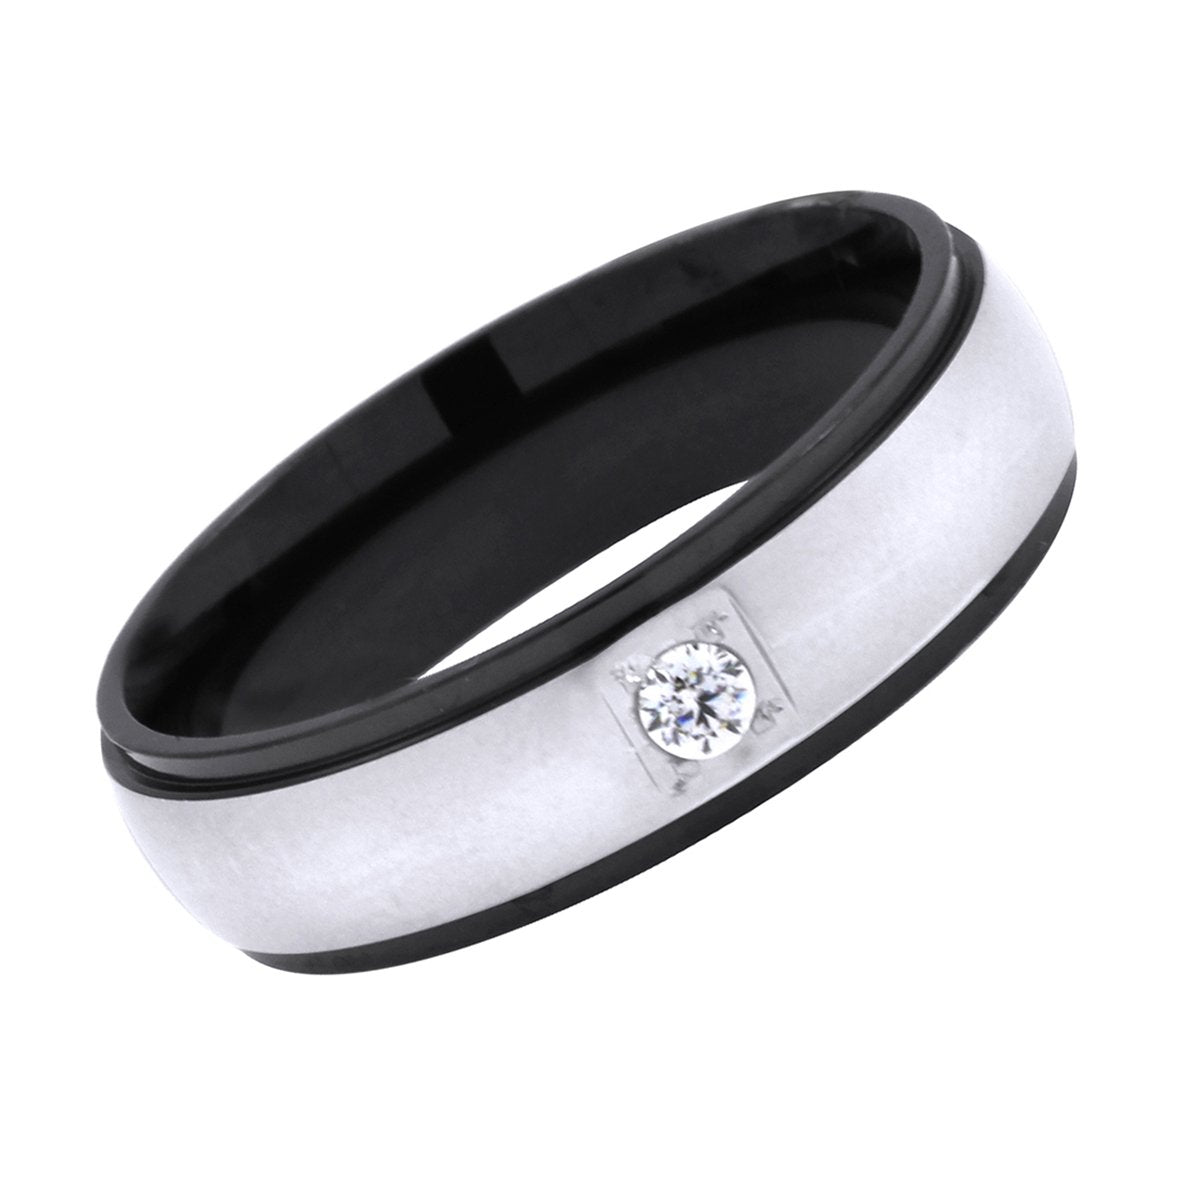 Mens Simple Steel Piano Flat Wedding Rings For Him With Two Tones Authentic  And Stylish From Loiselleny, $8.84 | DHgate.Com